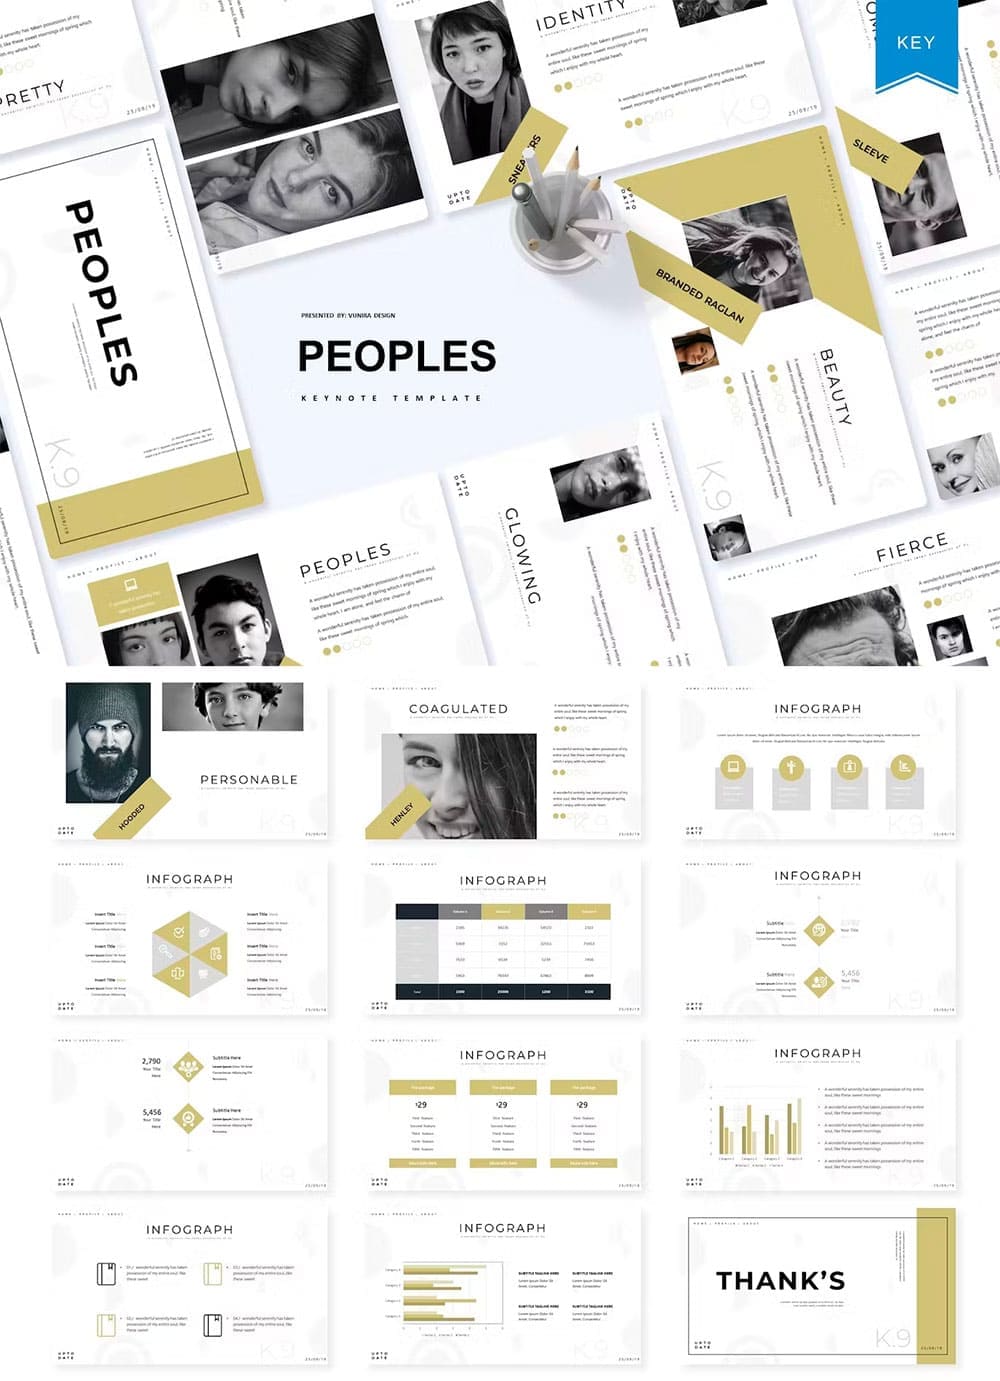 Peoples keynote template, picture for pinterest.